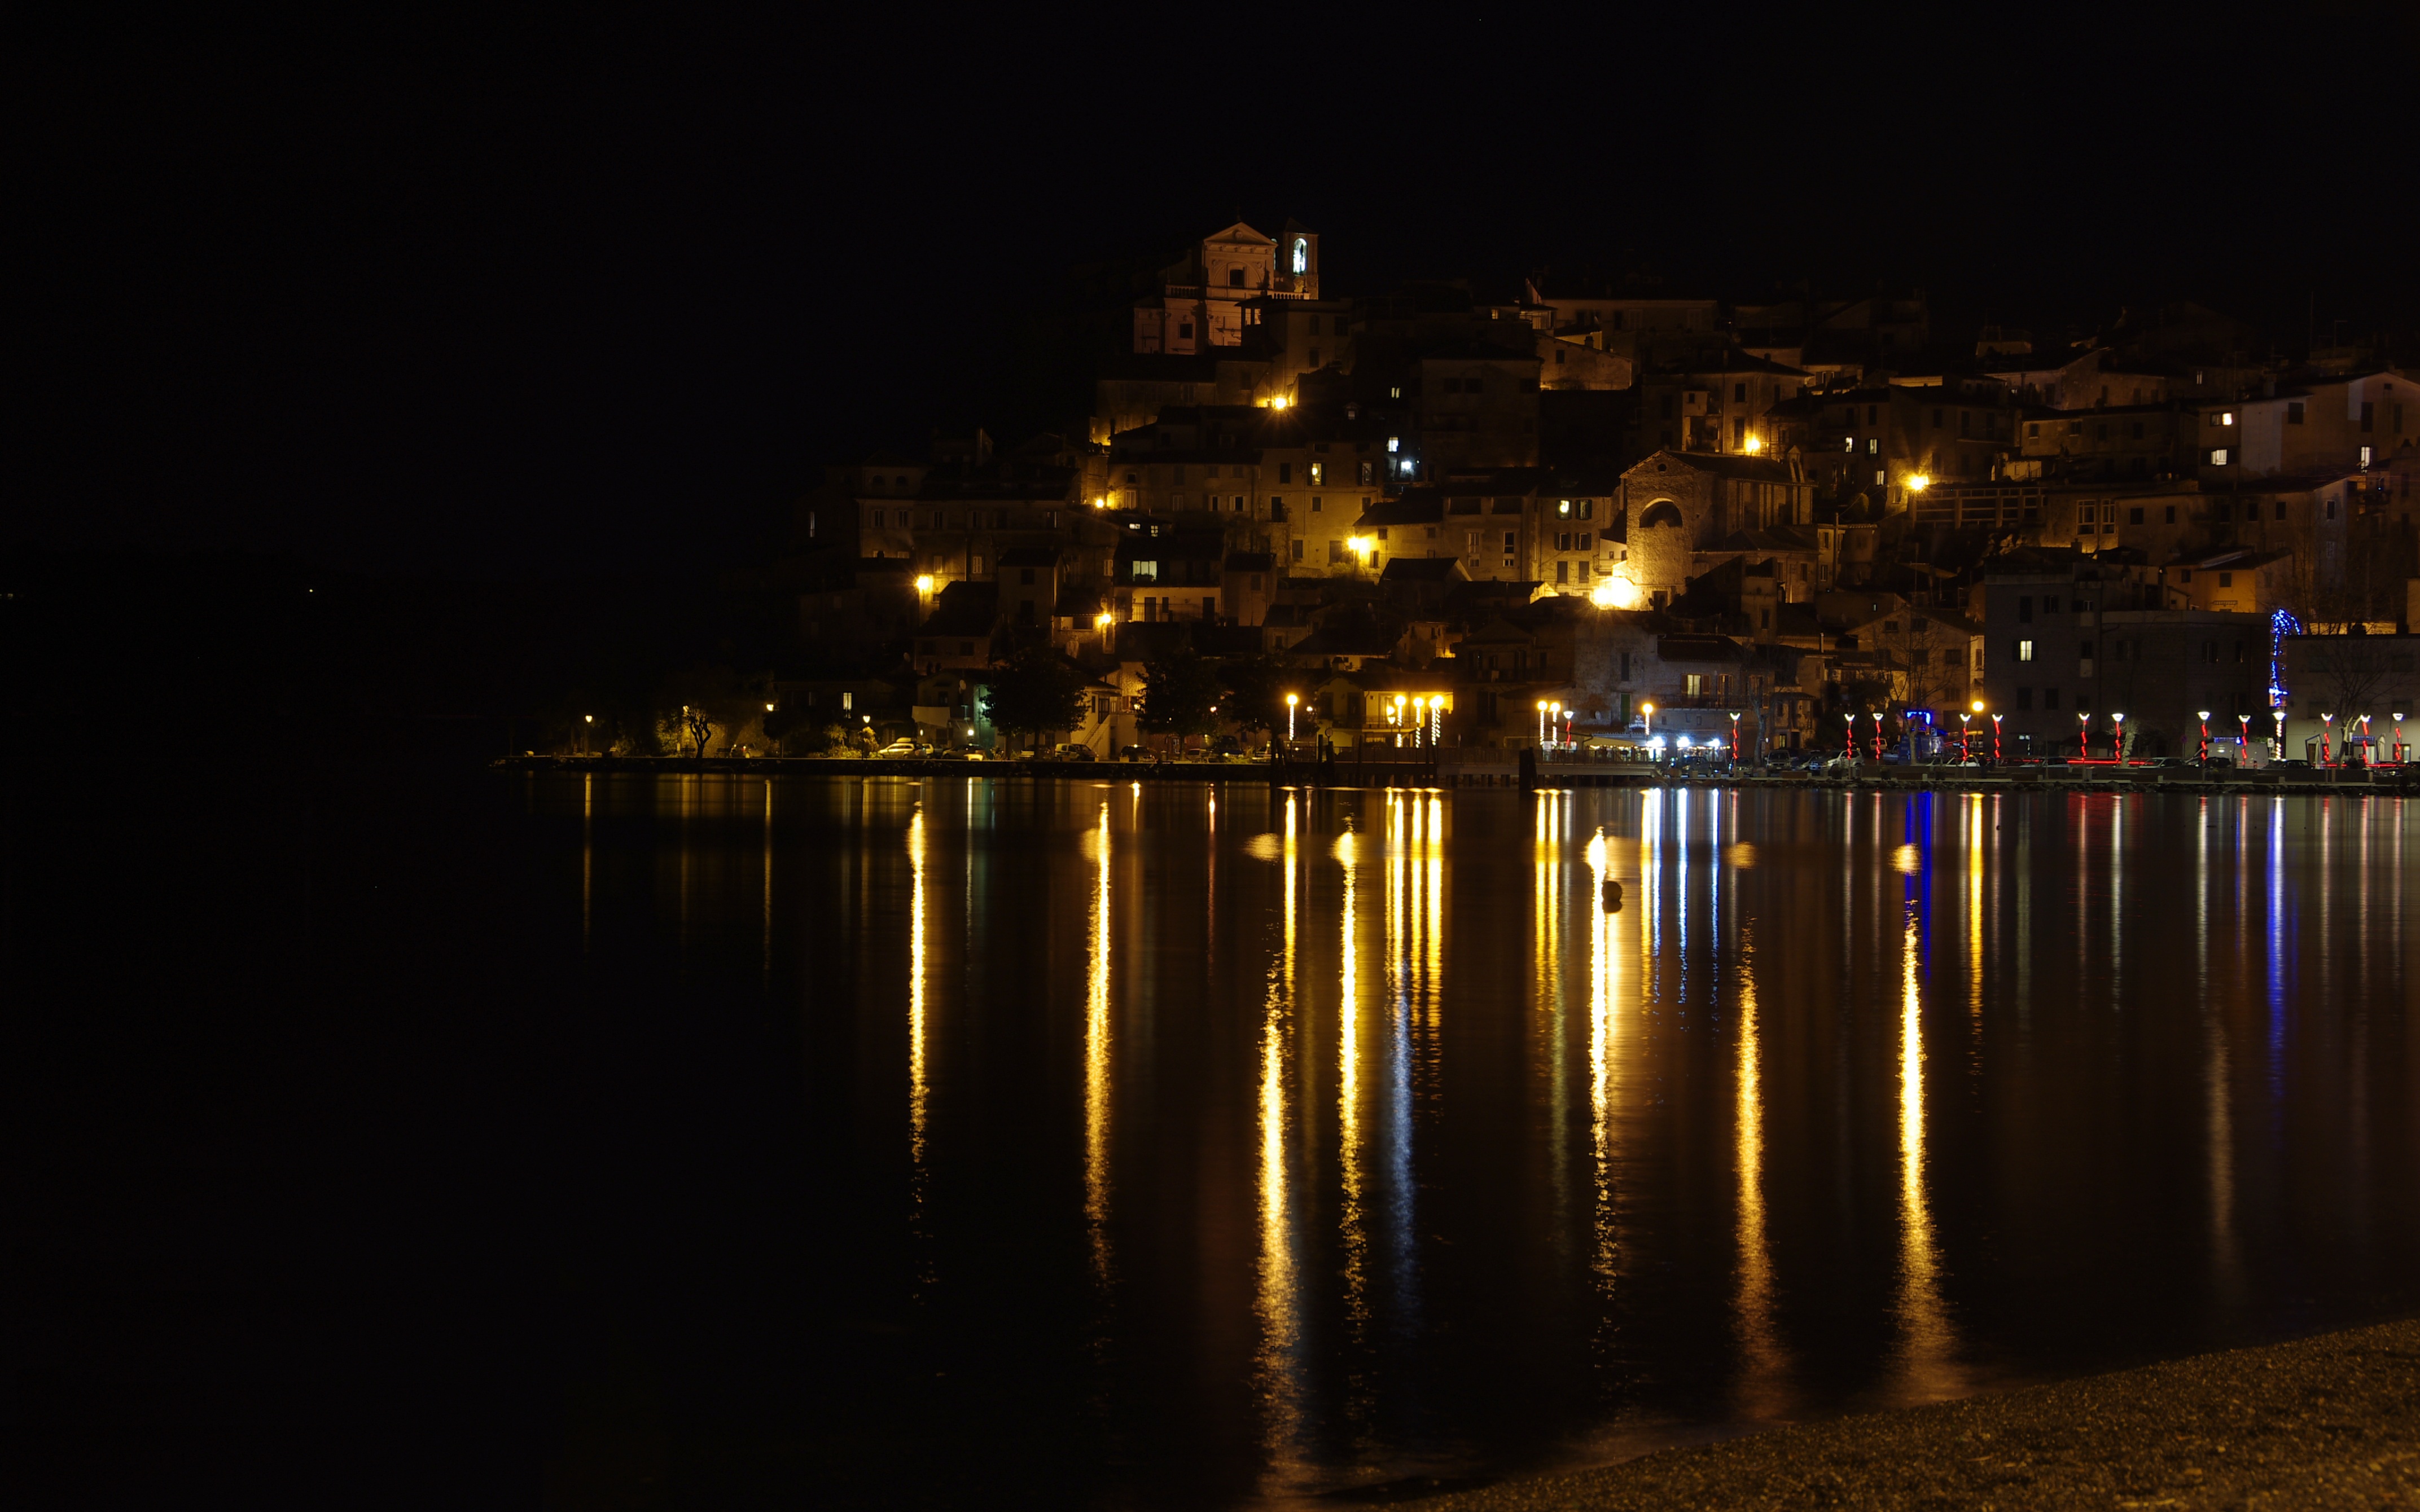 man made, city, italy, lake, light, night, old, reflection, town, cities